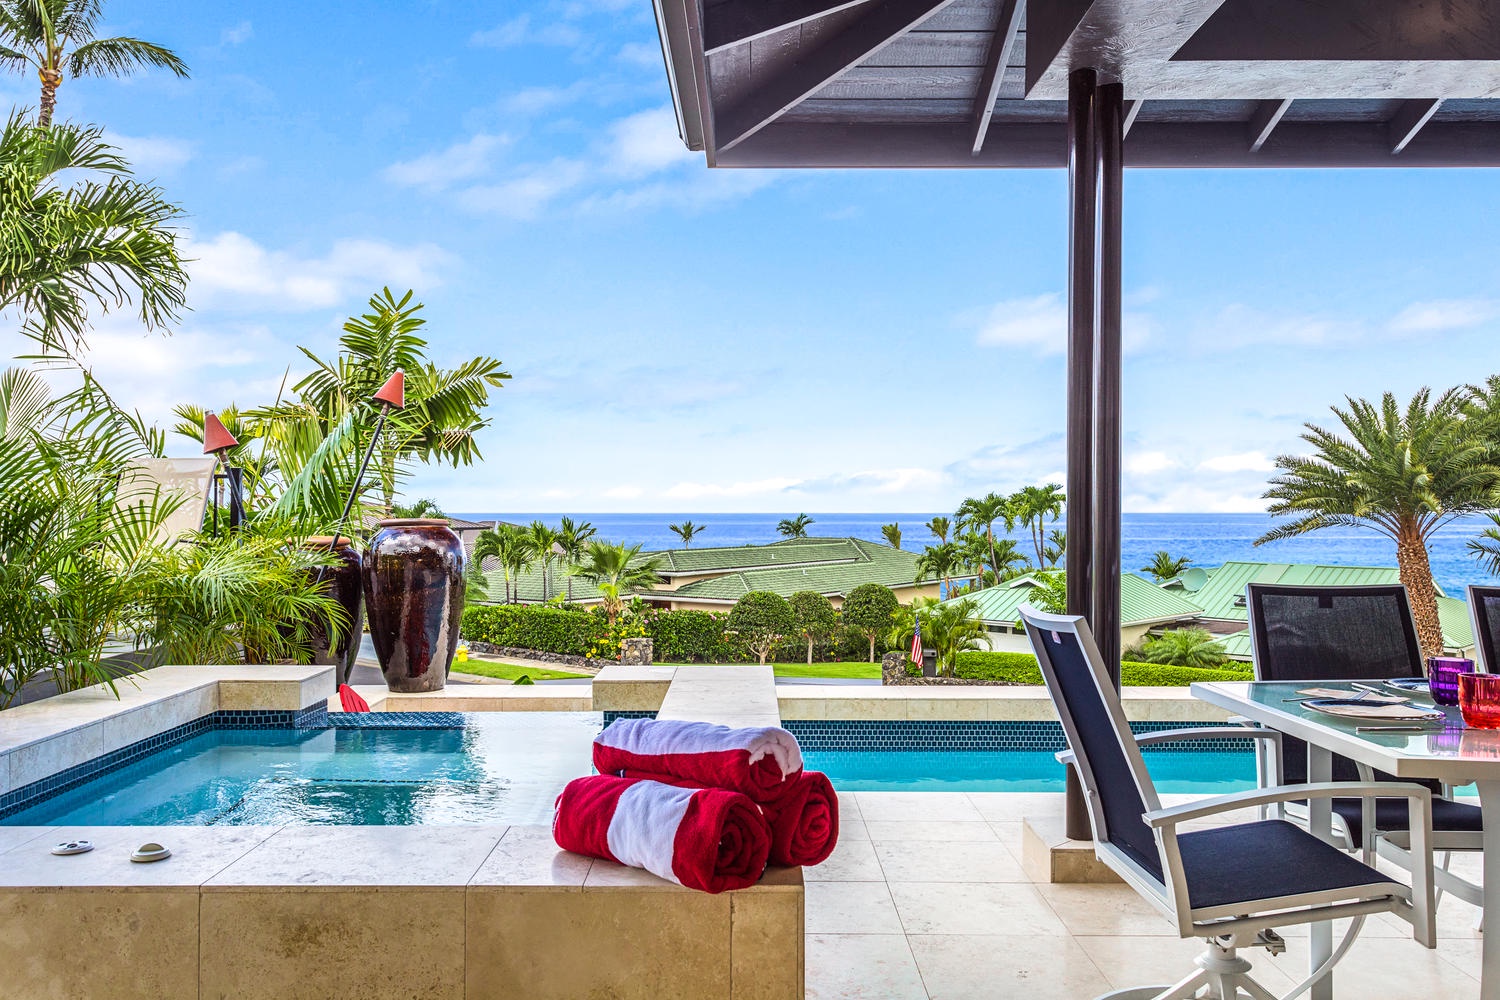 Kailua Kona Vacation Rentals, Ohana le'ale'a - Lounge in the private pool/spa with a view